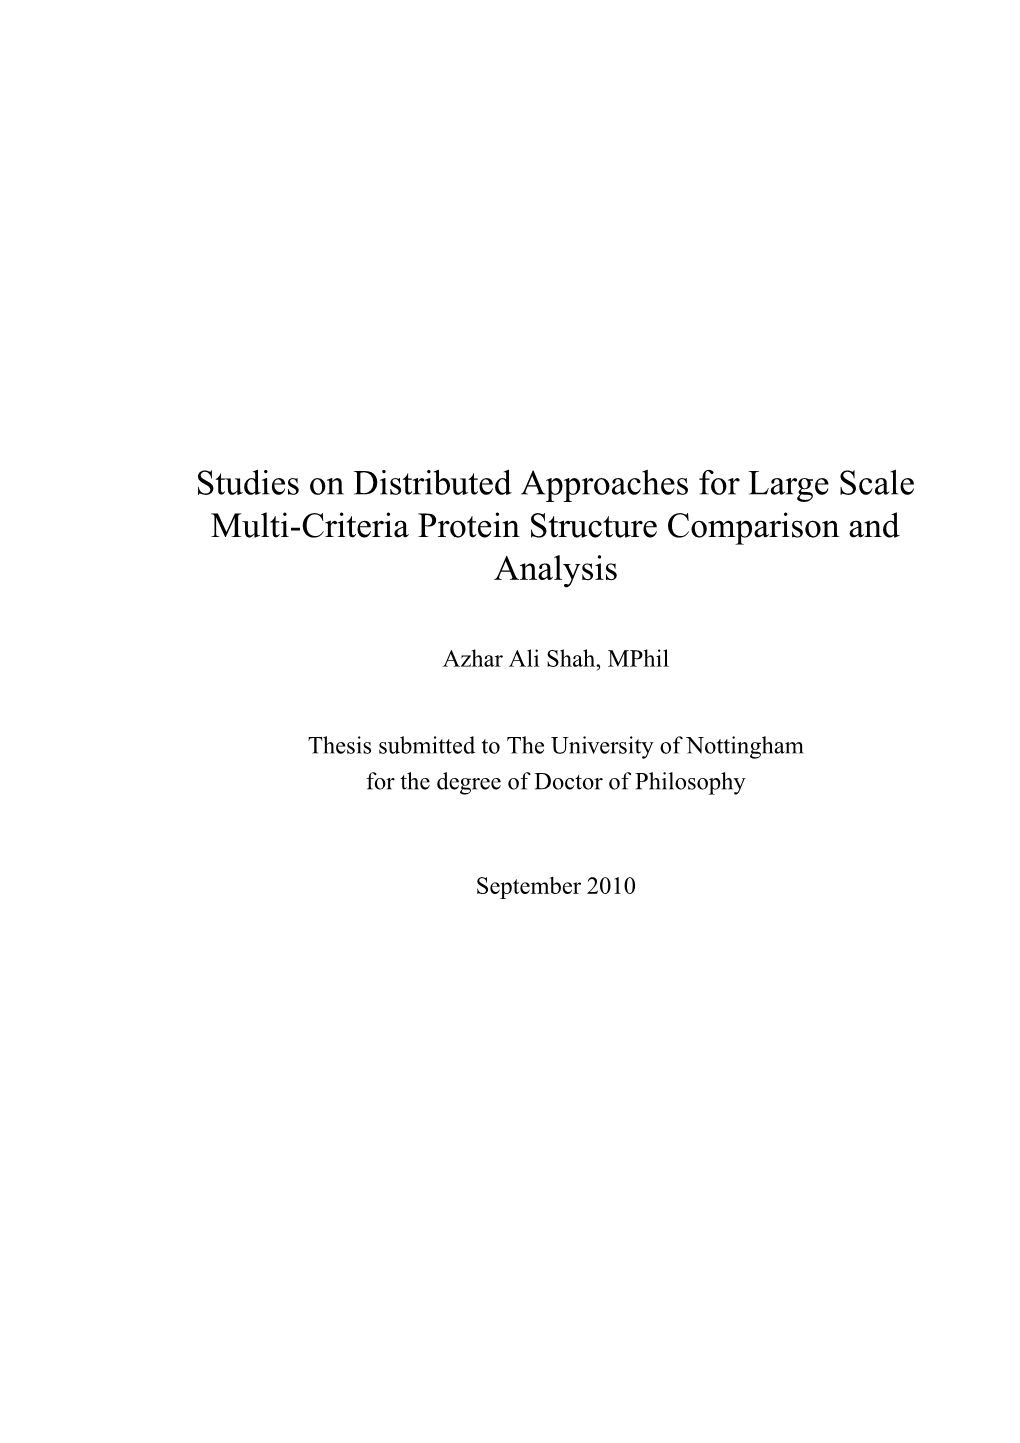 Studies on Distributed Approaches for Large Scale Multi-Criteria Protein Structure Comparison and Analysis